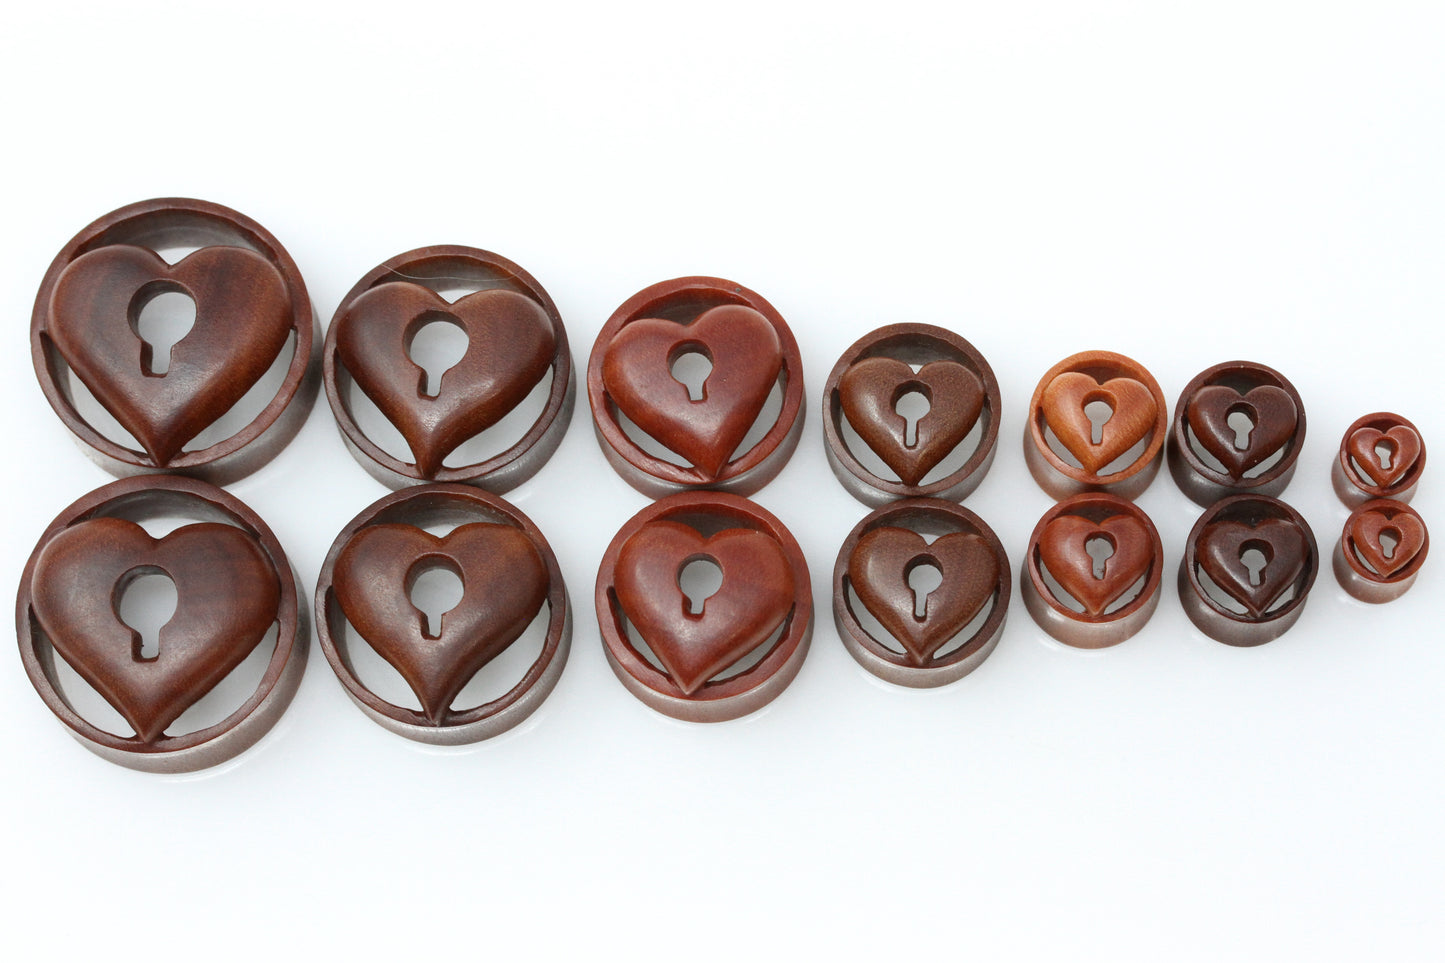 Hand carved heart tunnels